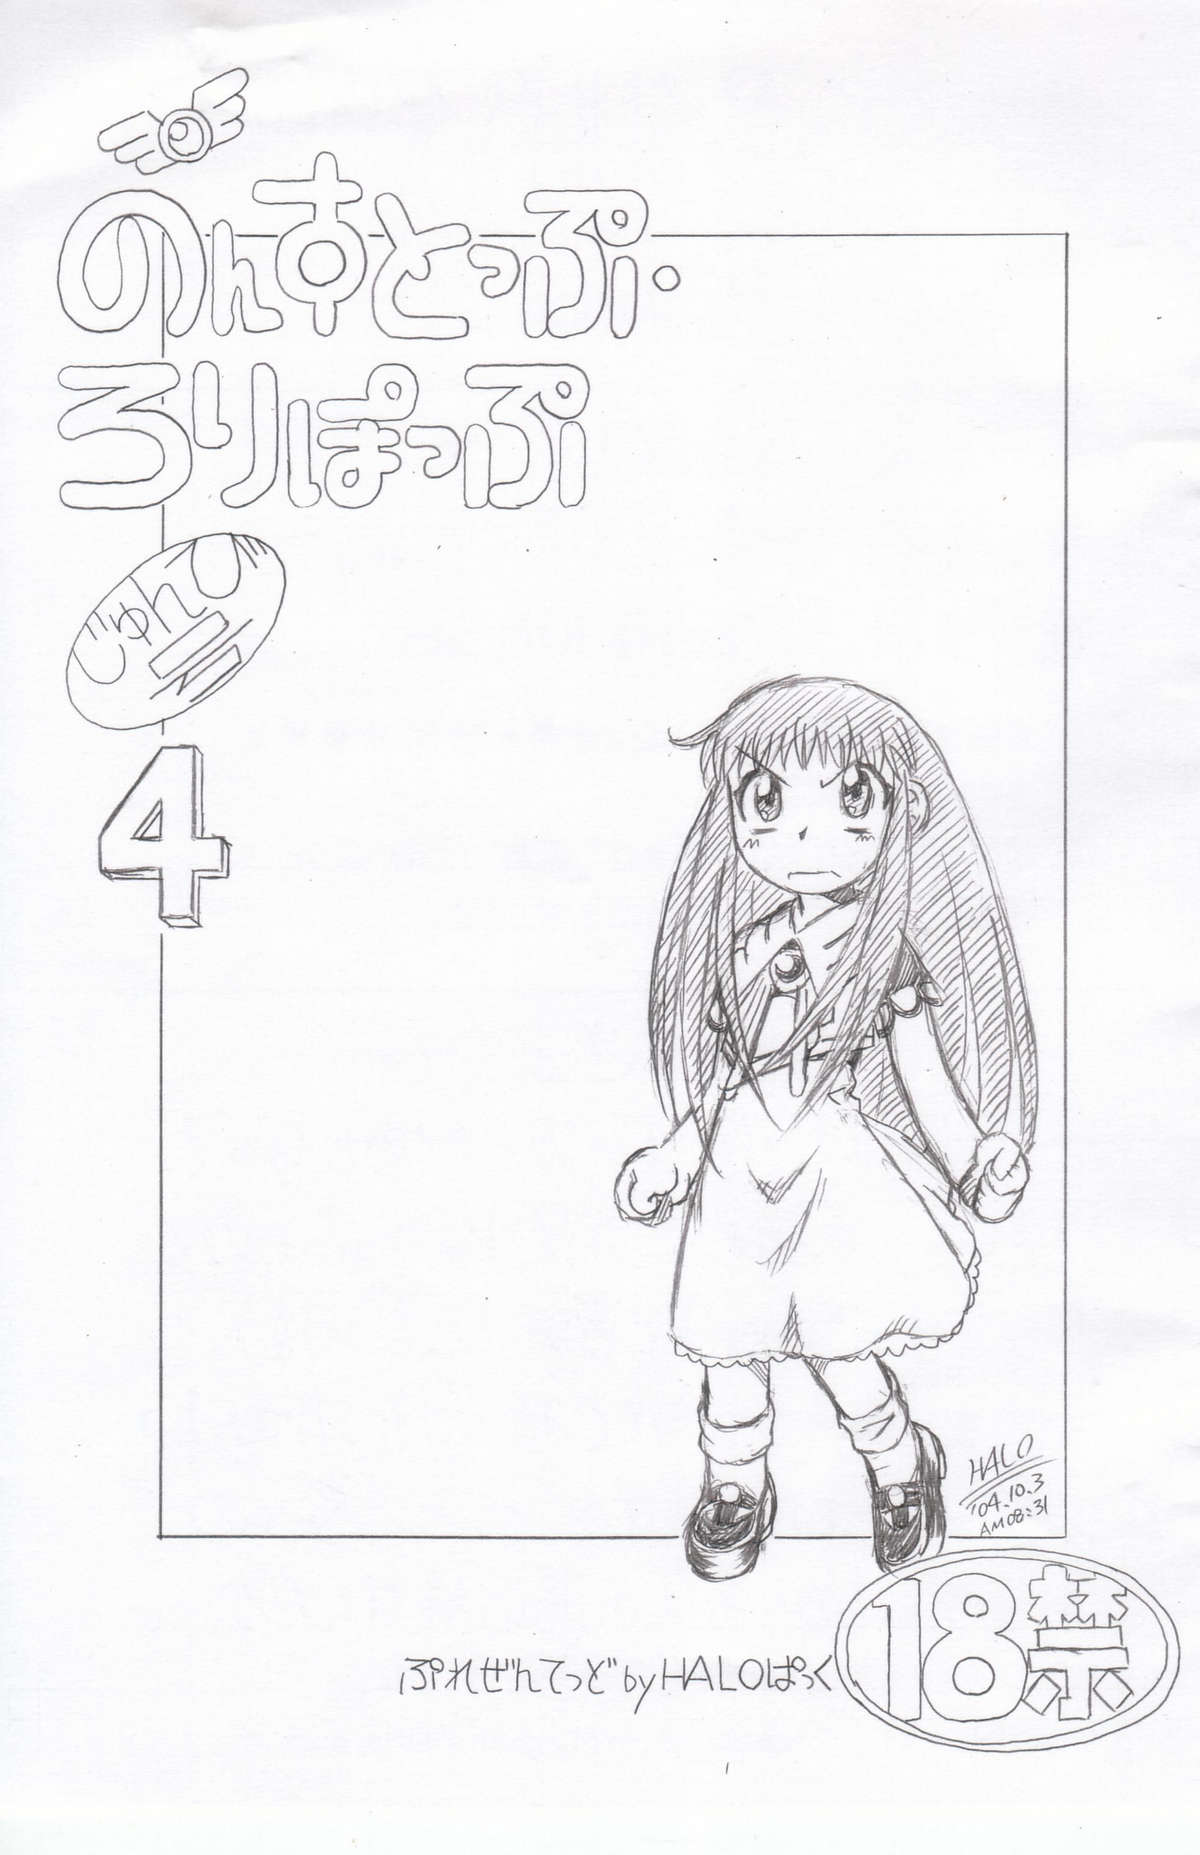 [HALO-PACK][Zatch Bell] Non-Stop Loli-Pop #04 page 1 full